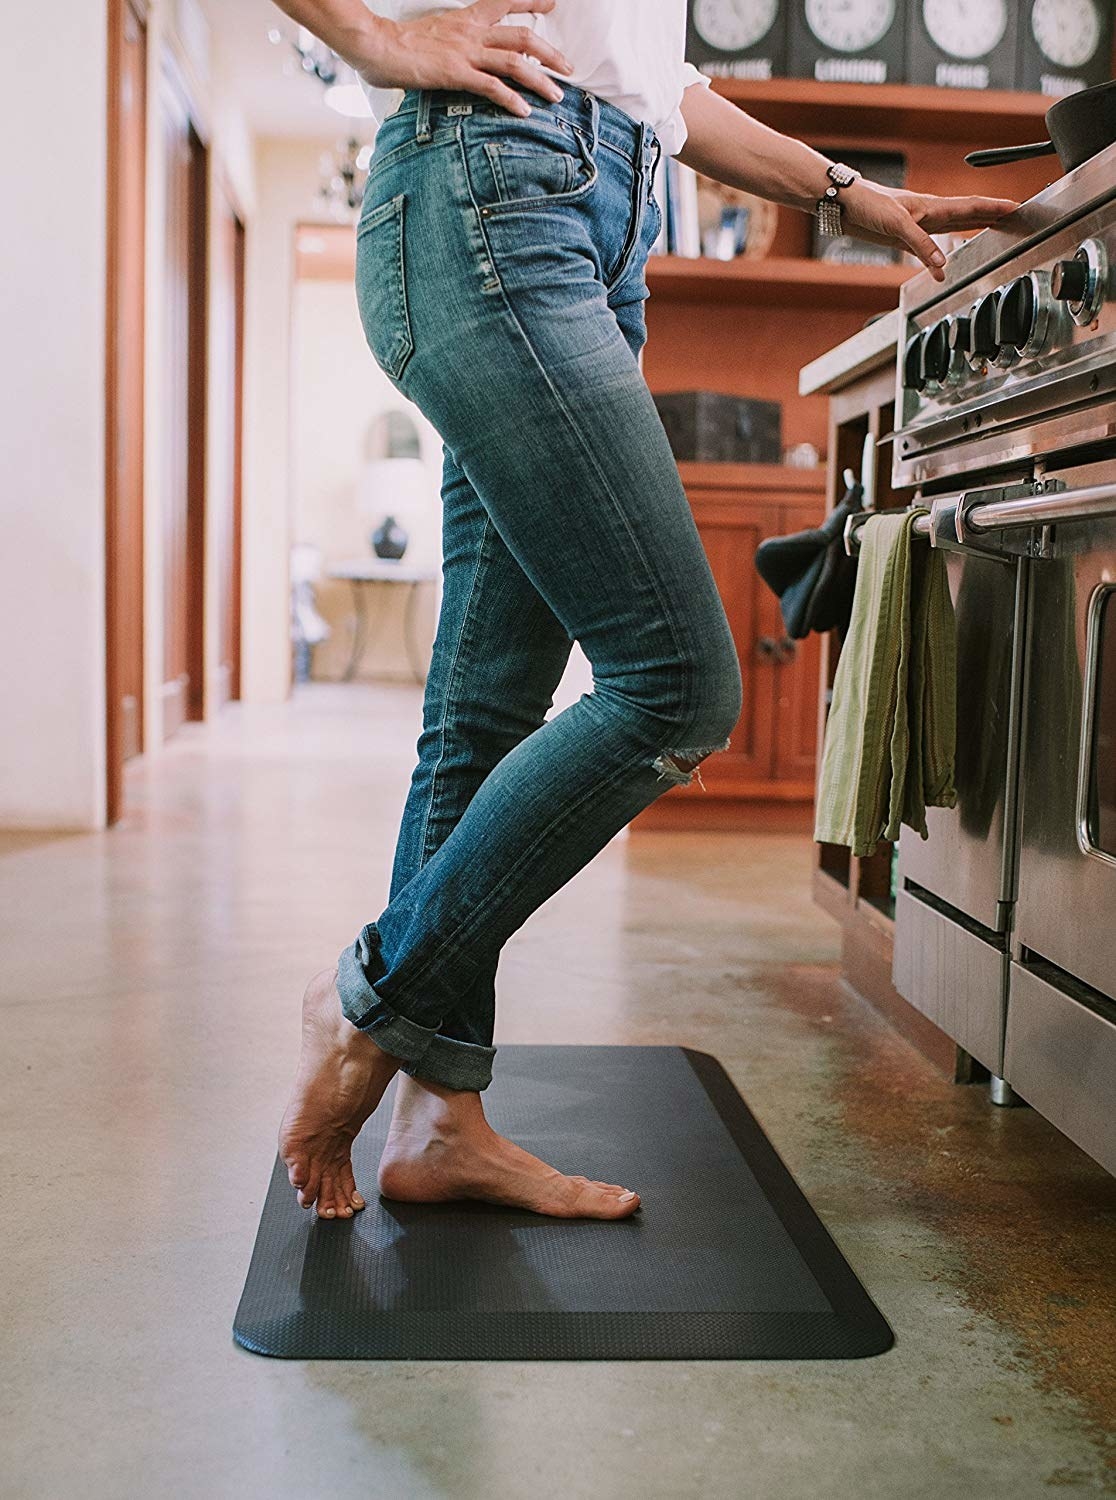 model stands bare-footed on black anti-fatigue mat